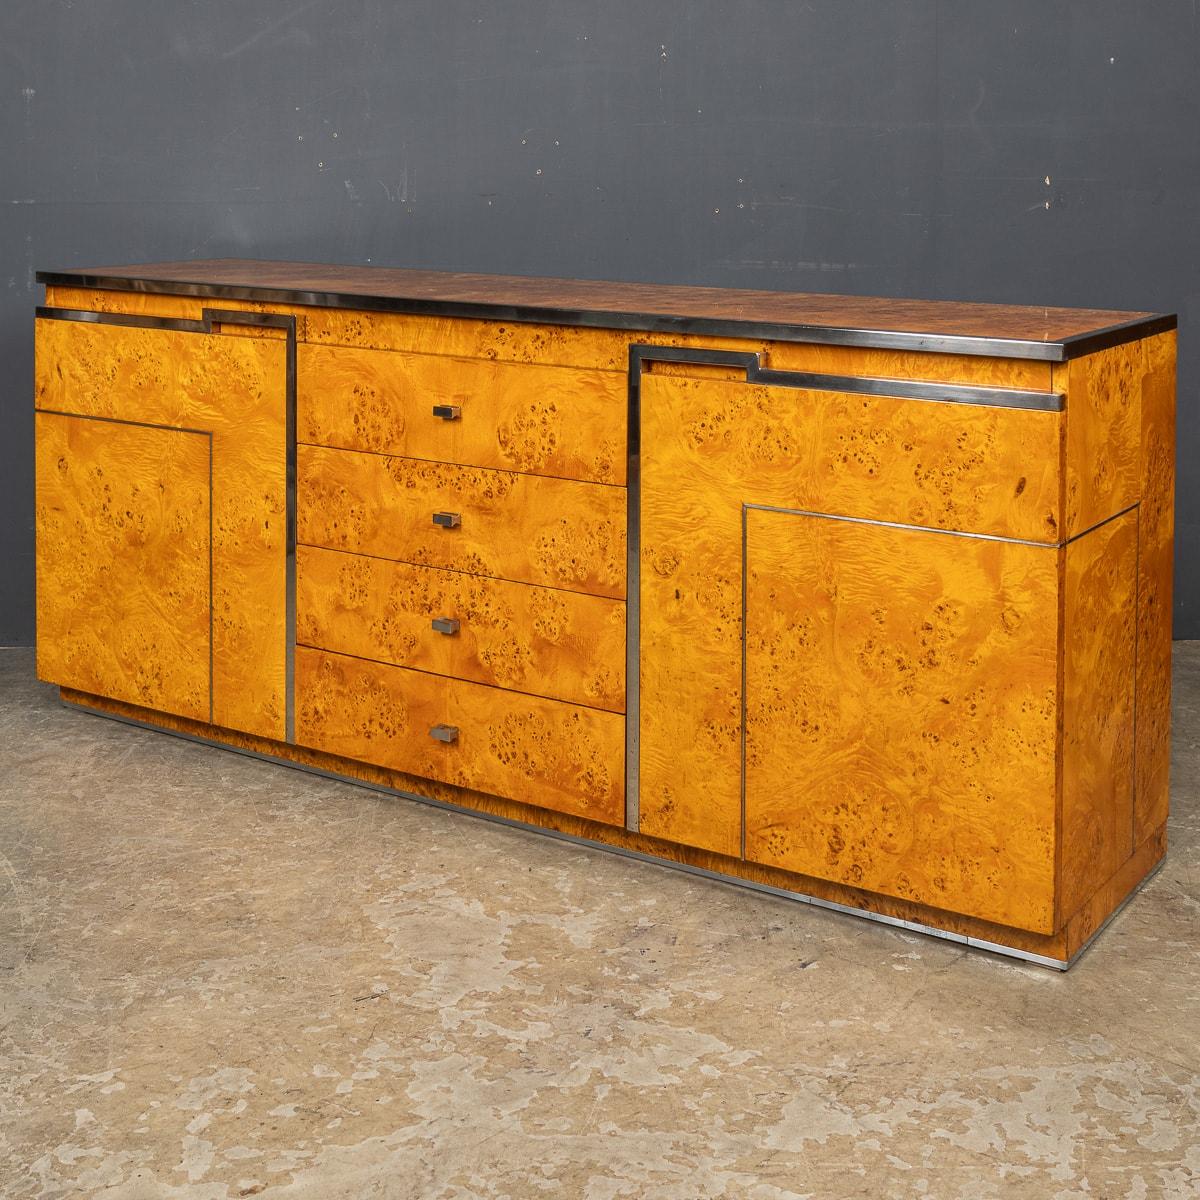 A stunning 20th Century credenza finished in pollard oak with the addition of polished nickel edges and hardware. This piece has four drawers and a cupboard at either end. The reverse side is also finished in the same style so this piece can be used